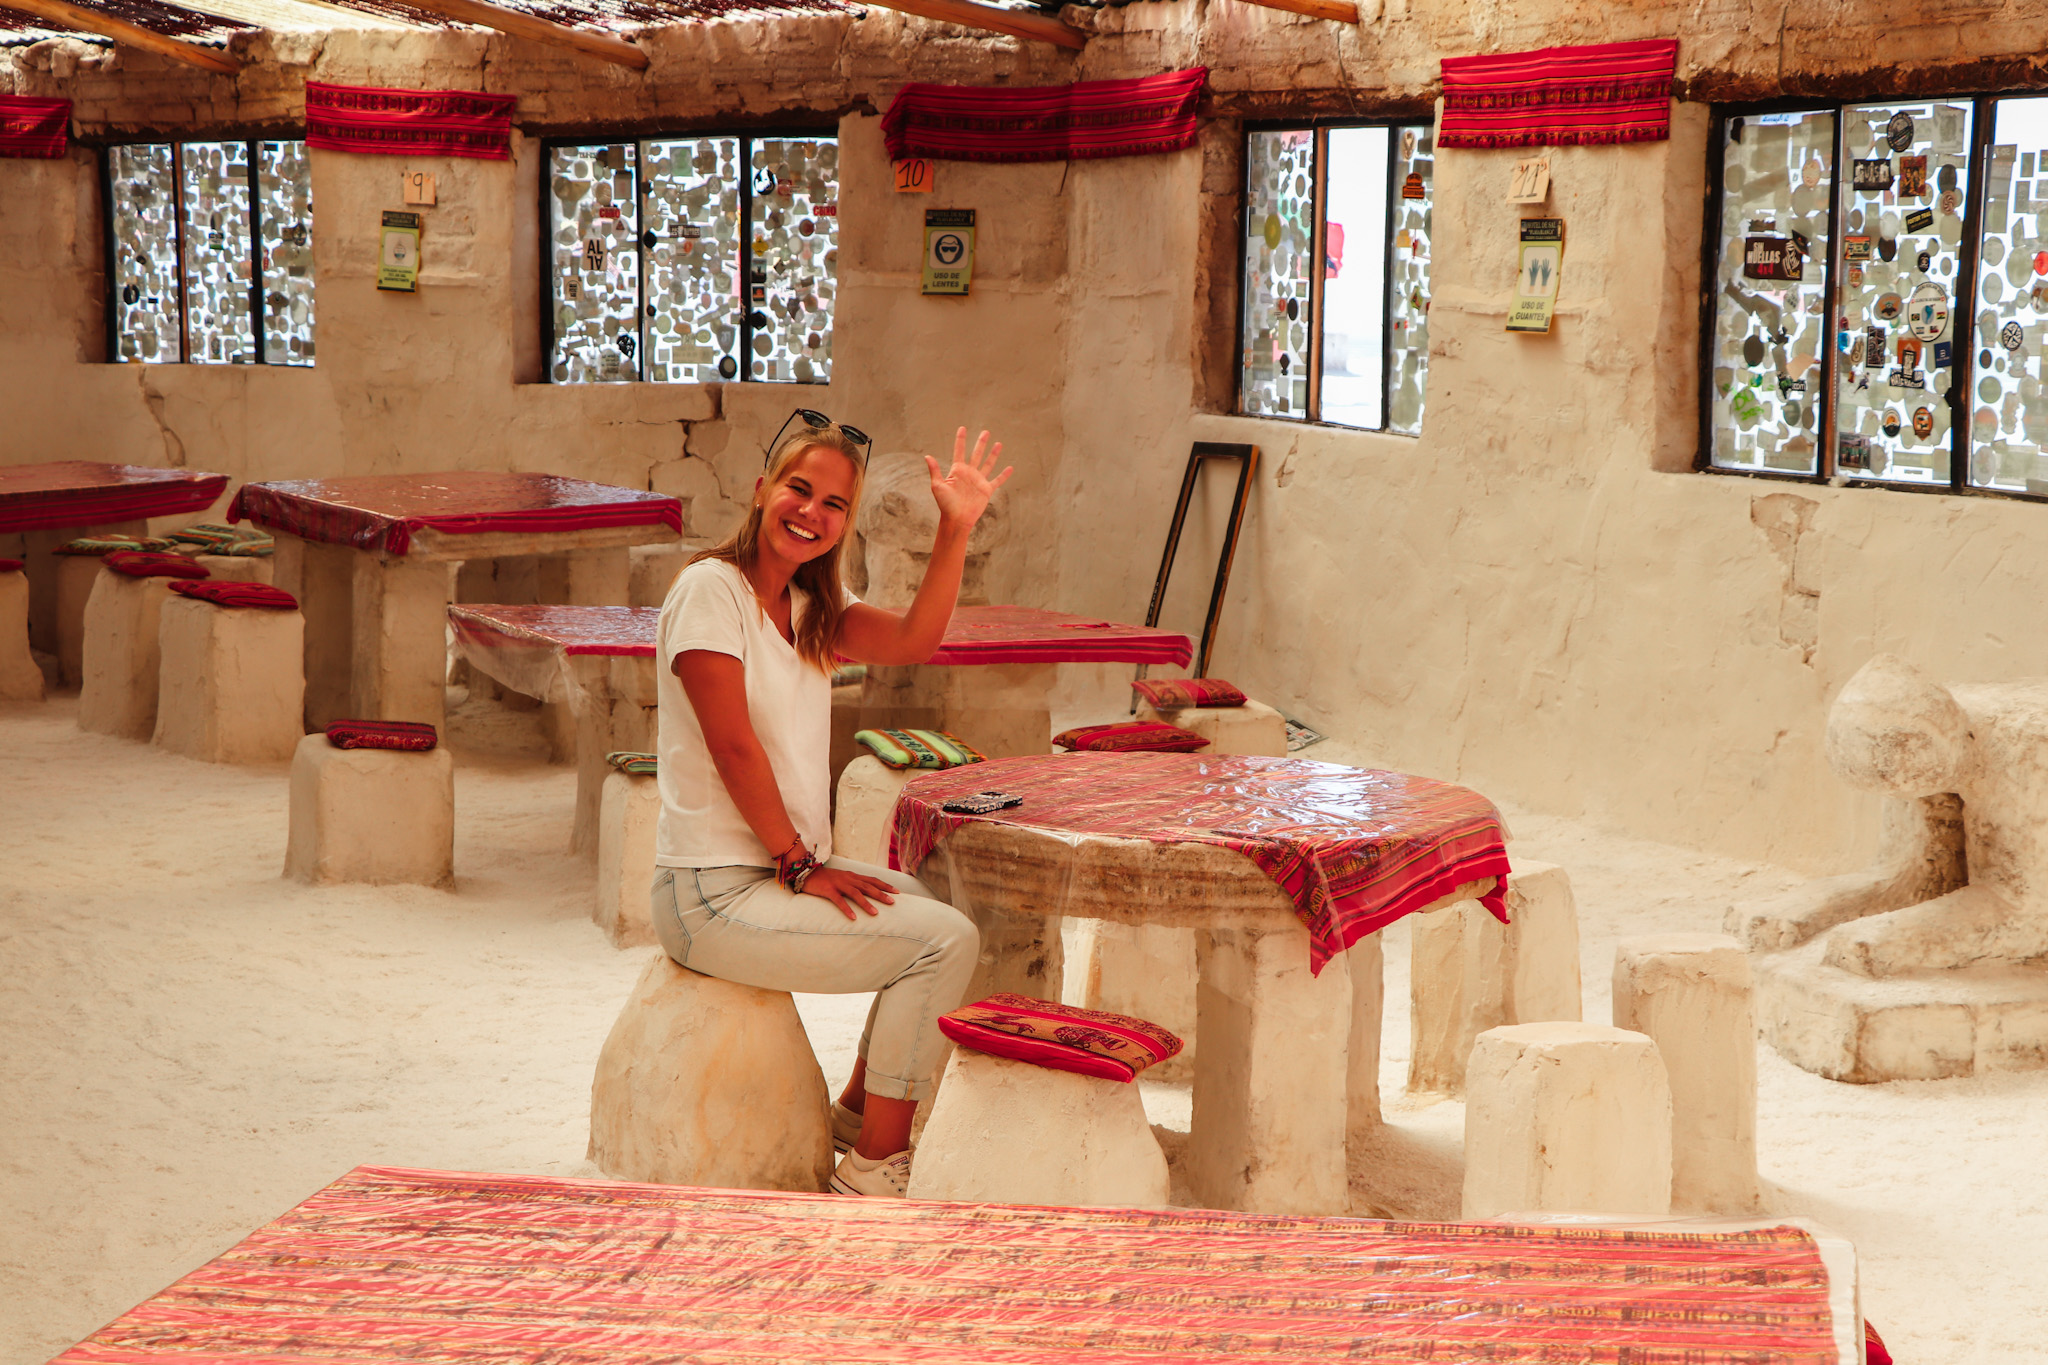 Uyuni Travel Guide: In the hotels in Salar de Uyuni everything is made out of salt blocks - walls, tables and even beds